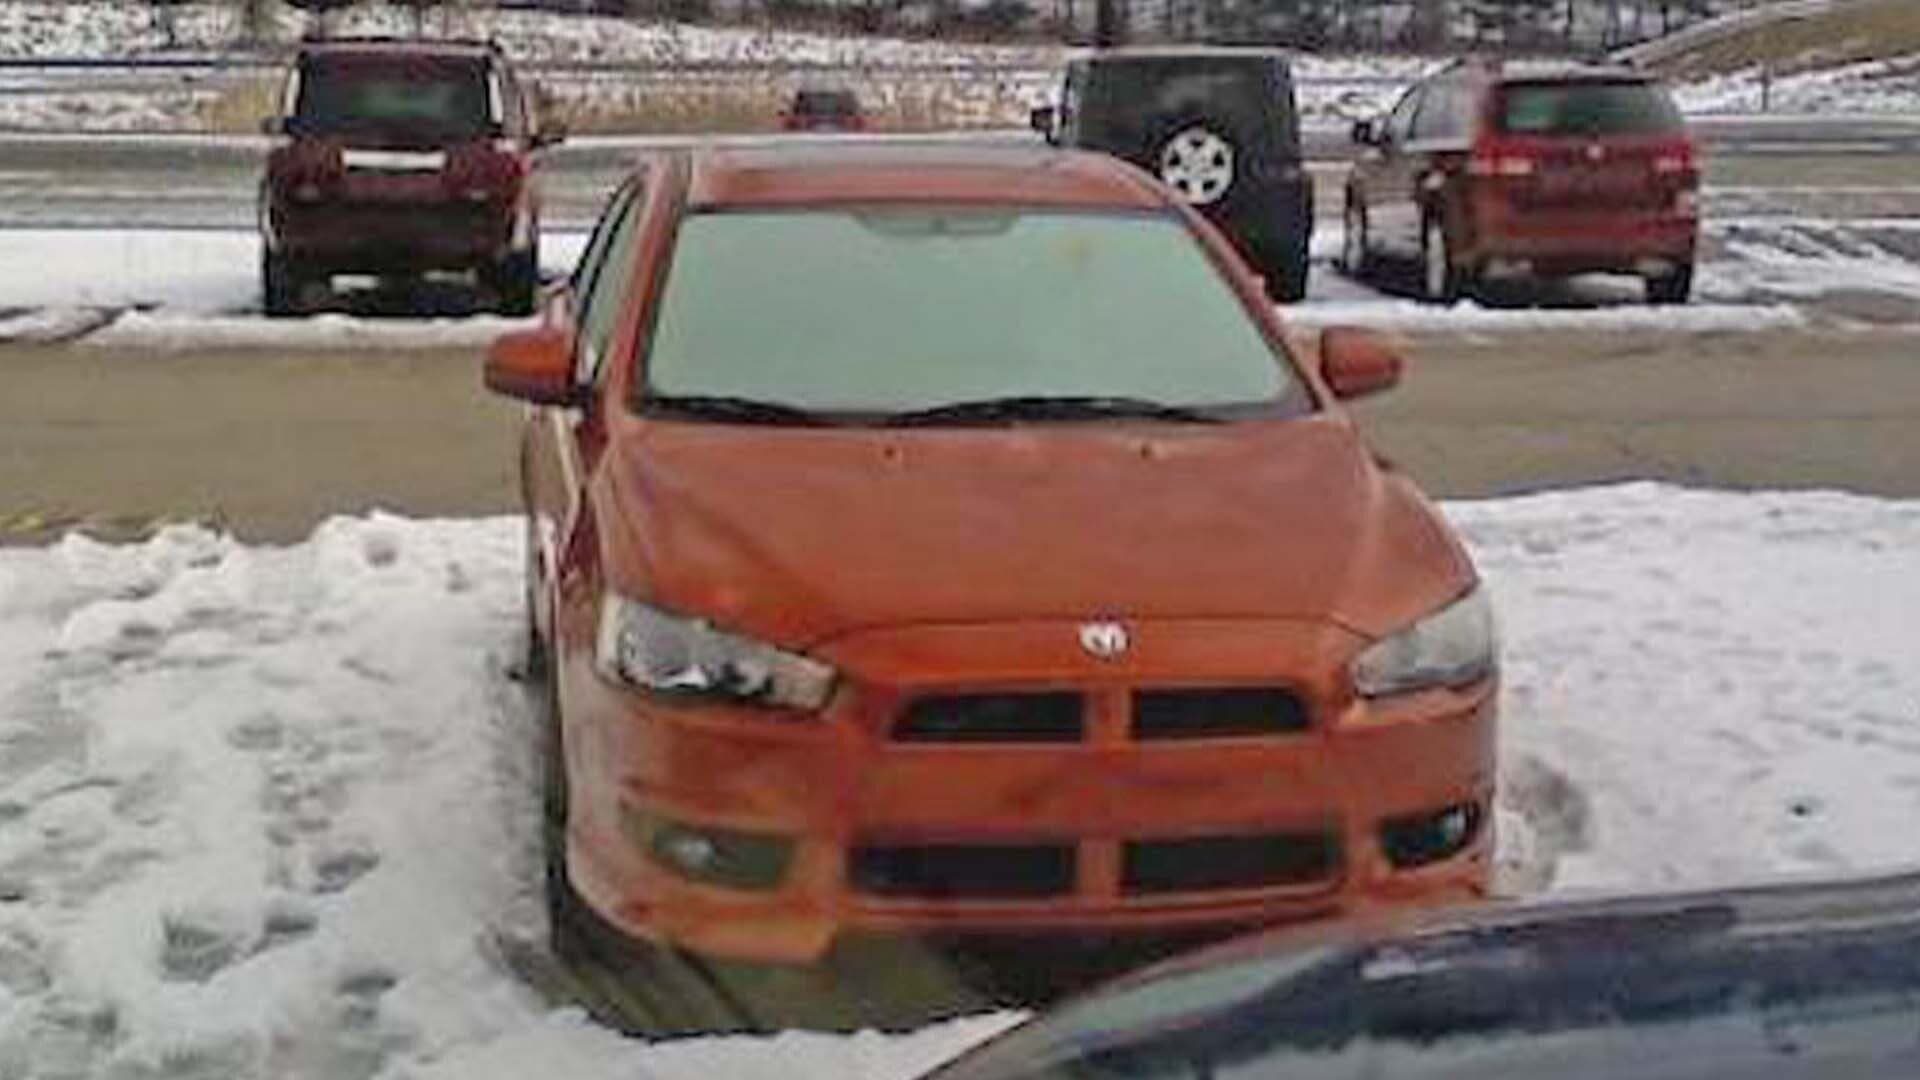 Lost Dodge-Mitsubishi Prototype Last Seen in 2010 Could’ve Become an American Lancer Evo